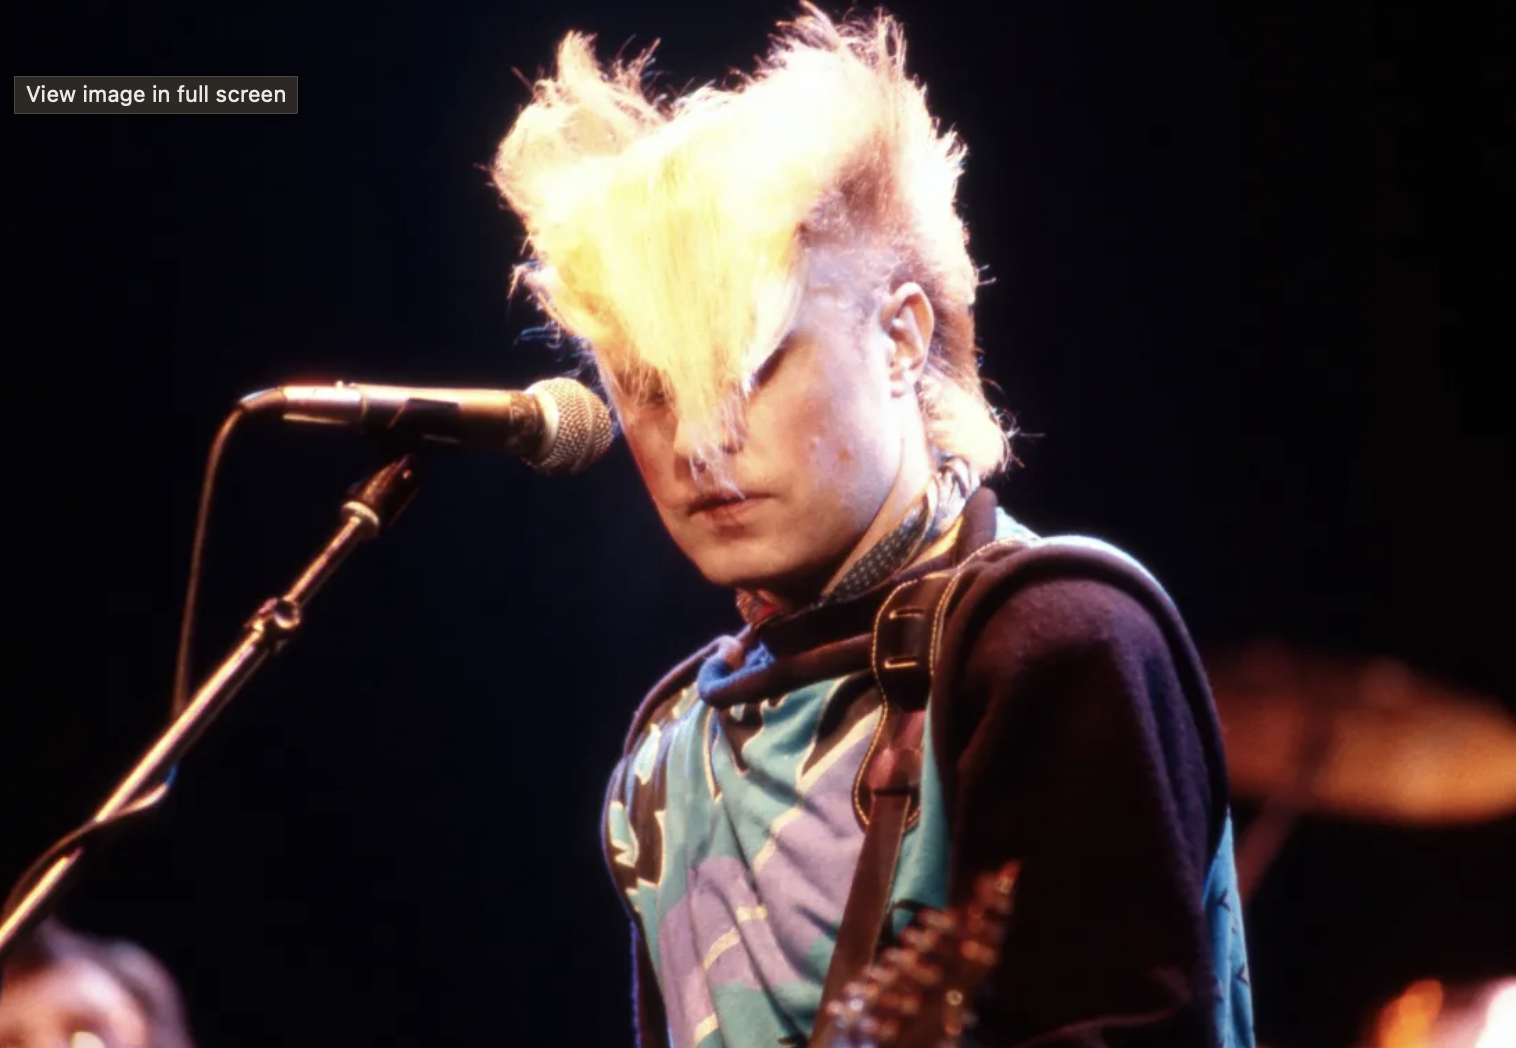 flock of seagulls - View image in full screen